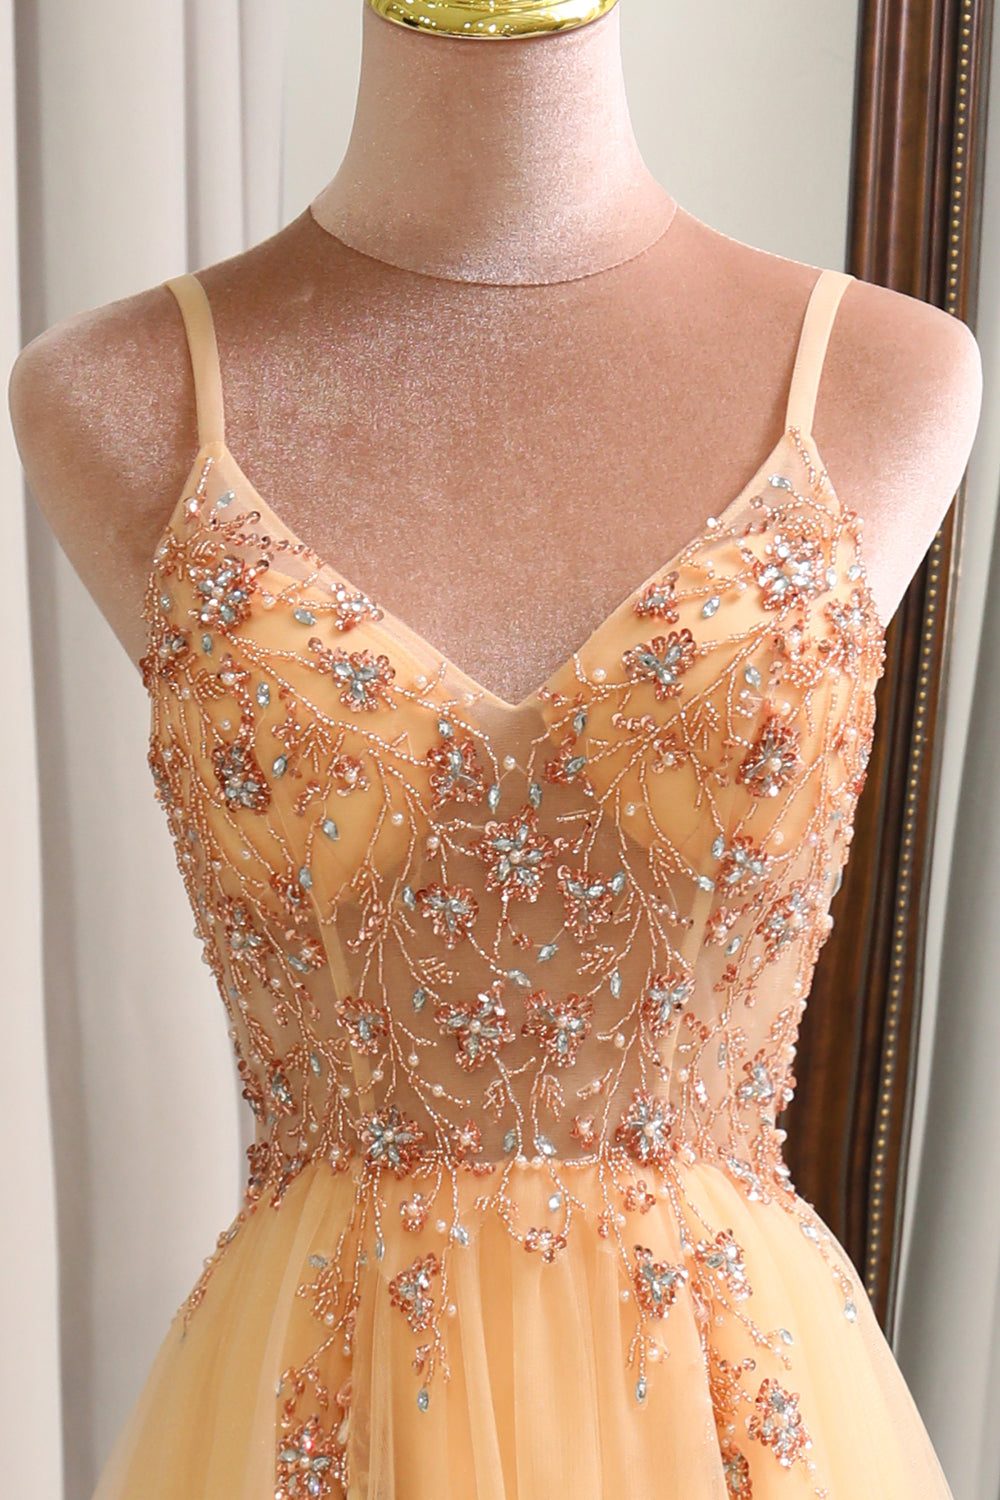 Charming A Line Spaghetti Straps Golden Long Prom Dress with Beading